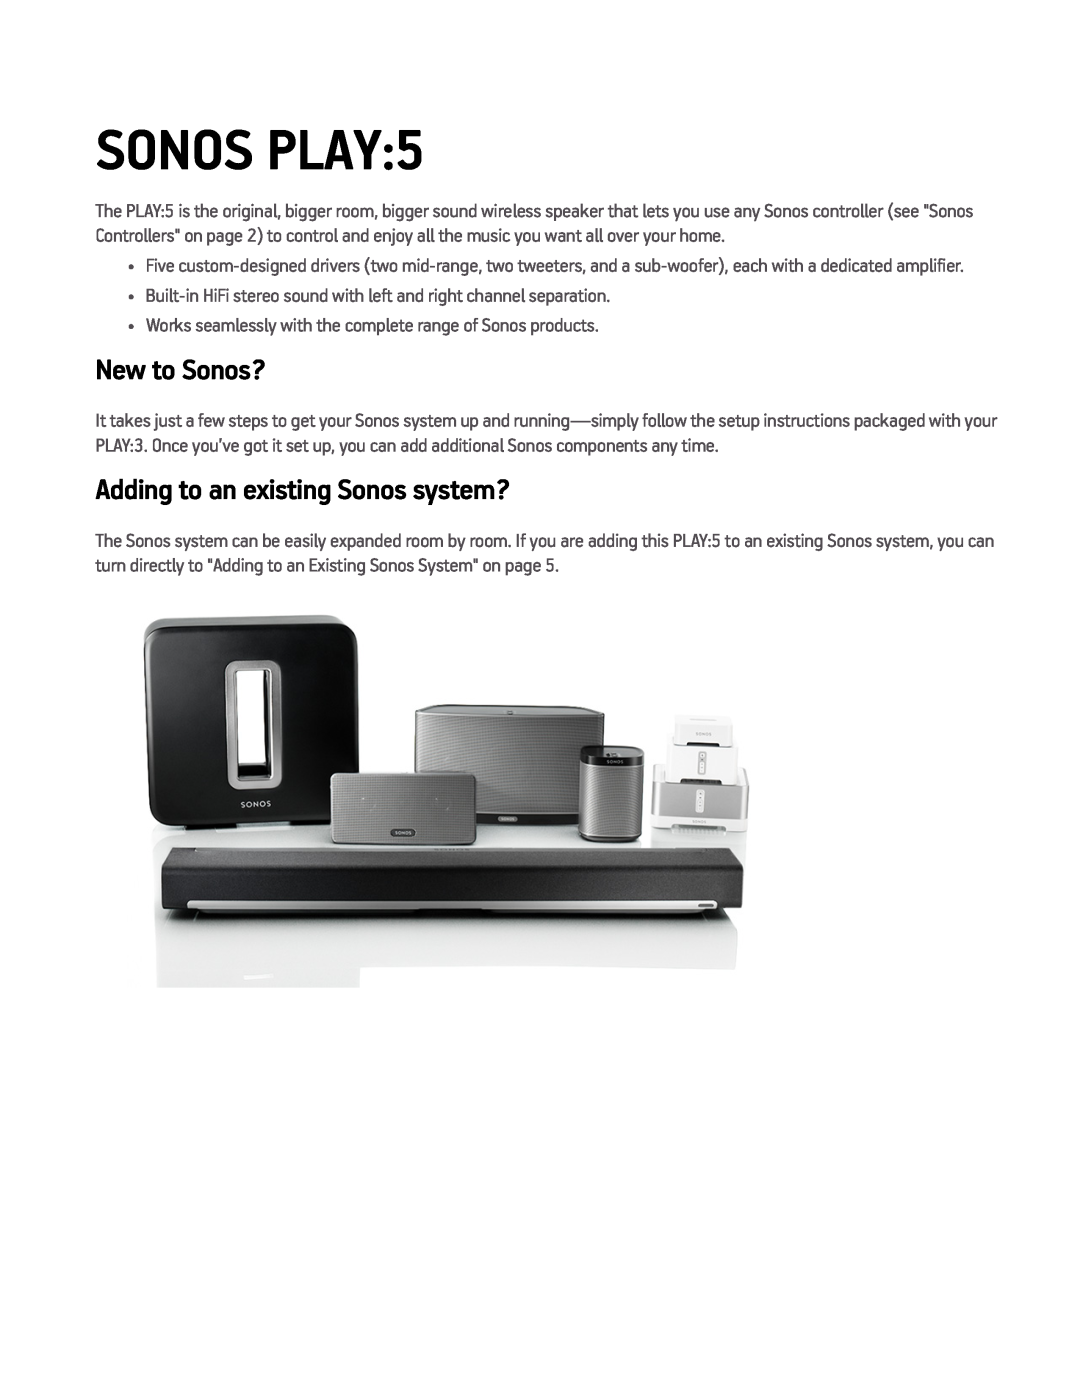 Sonos PLAY5WHITE, PLAY5BLACK manual New to Sonos?, Adding to an existing Sonos system?, Sonos Play 